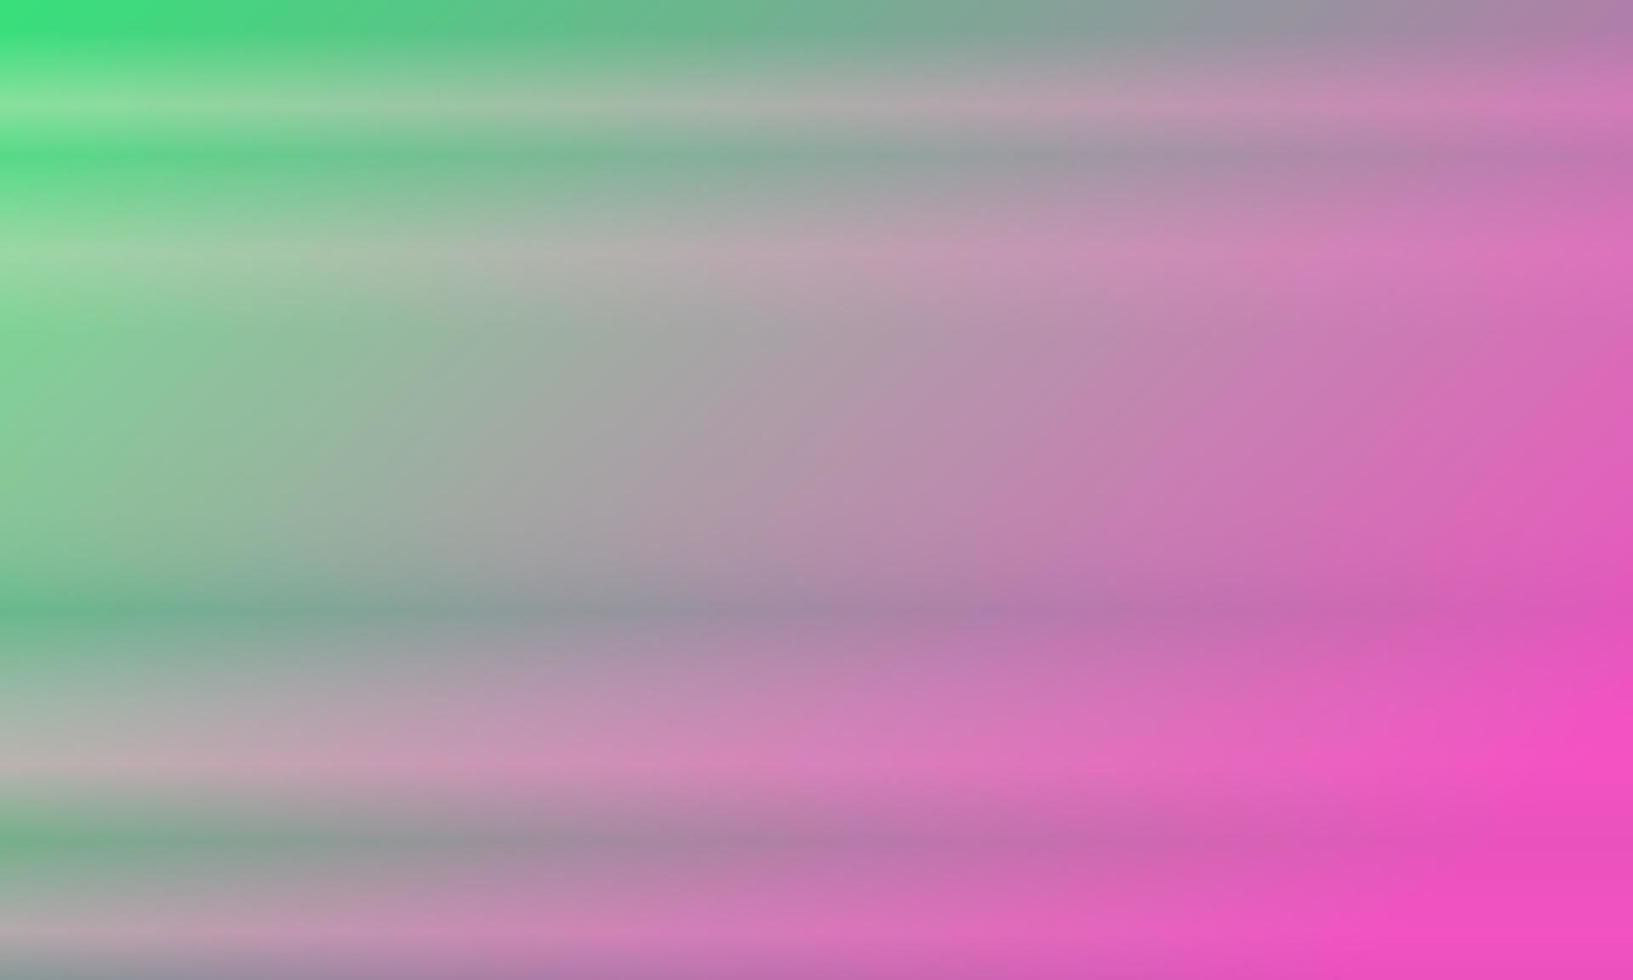 tosca green and pink horizontal gradient abstract background. shiny, blur, simple, modern and colorful style. great for backdrop, homepage, wallpaper, card, cover, poster, banner or flyer vector